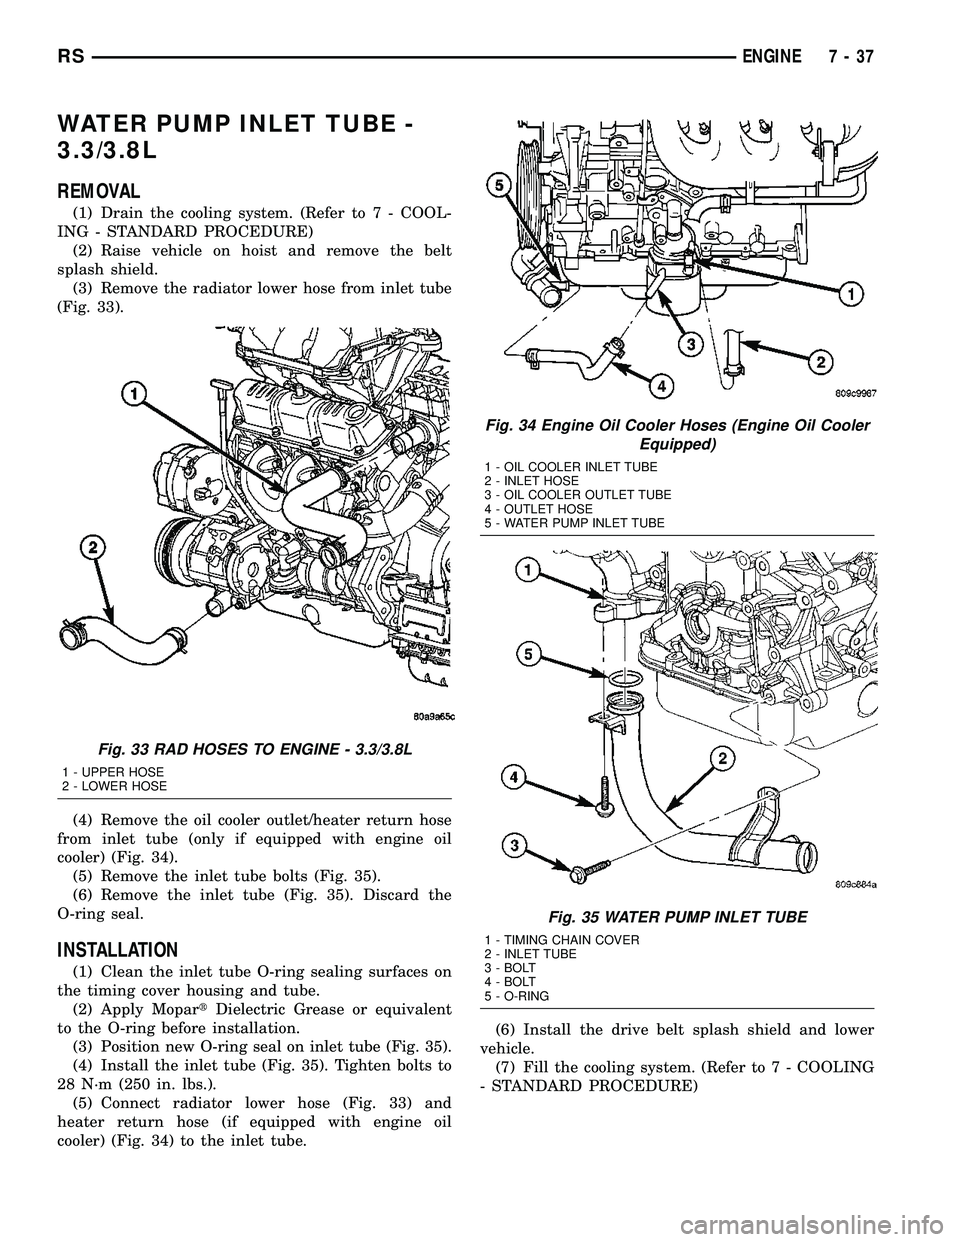 CHRYSLER CARAVAN 2005  Service Manual WATER PUMP INLET TUBE -
3.3/3.8L
REMOVAL
(1) Drain the cooling system. (Refer to 7 - COOL-
ING - STANDARD PROCEDURE)
(2) Raise vehicle on hoist and remove the belt
splash shield.
(3) Remove the radiat